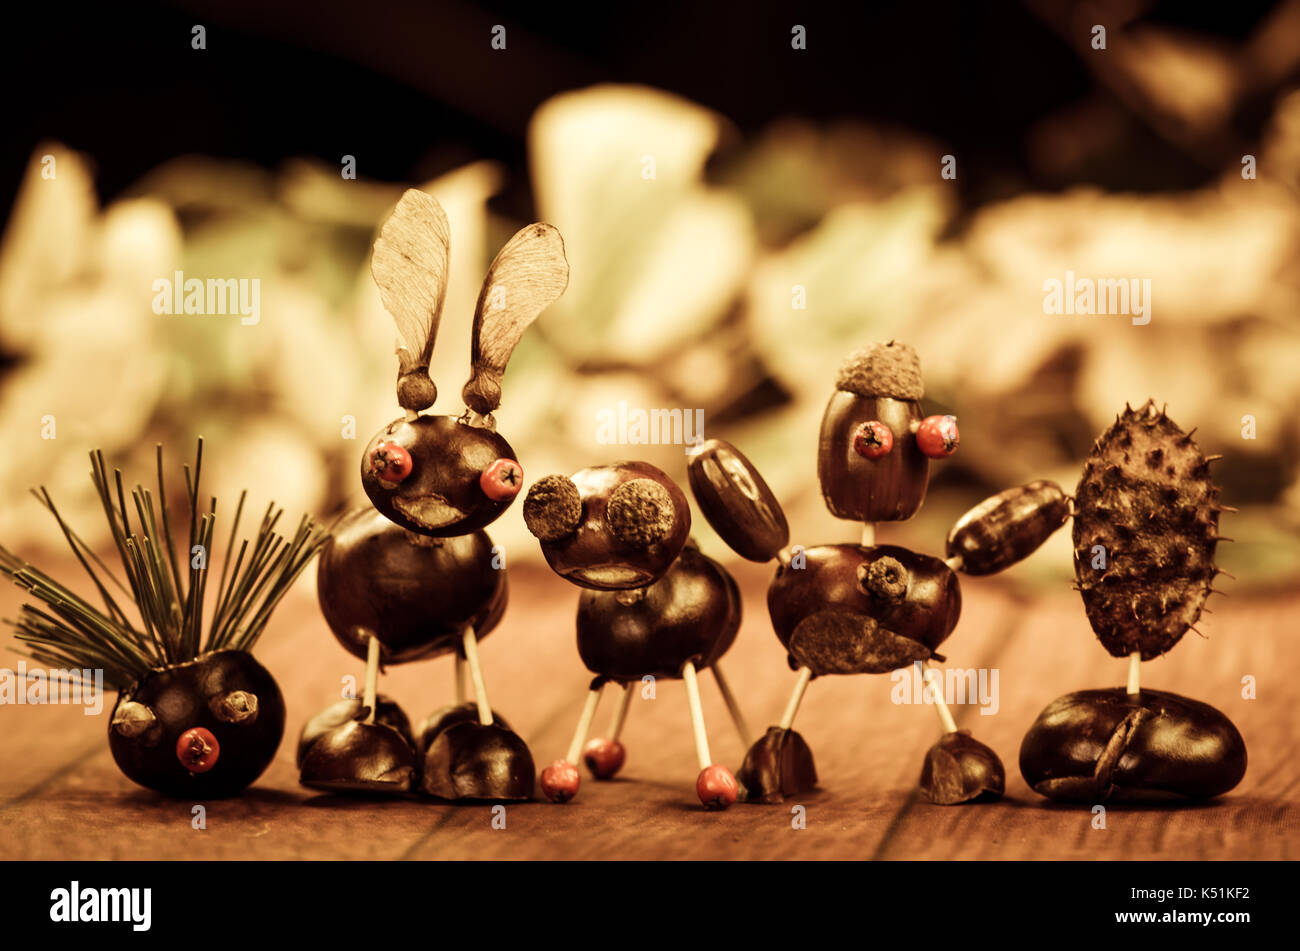 autumn figures made from chestnut fruit with creative concept Stock Photo